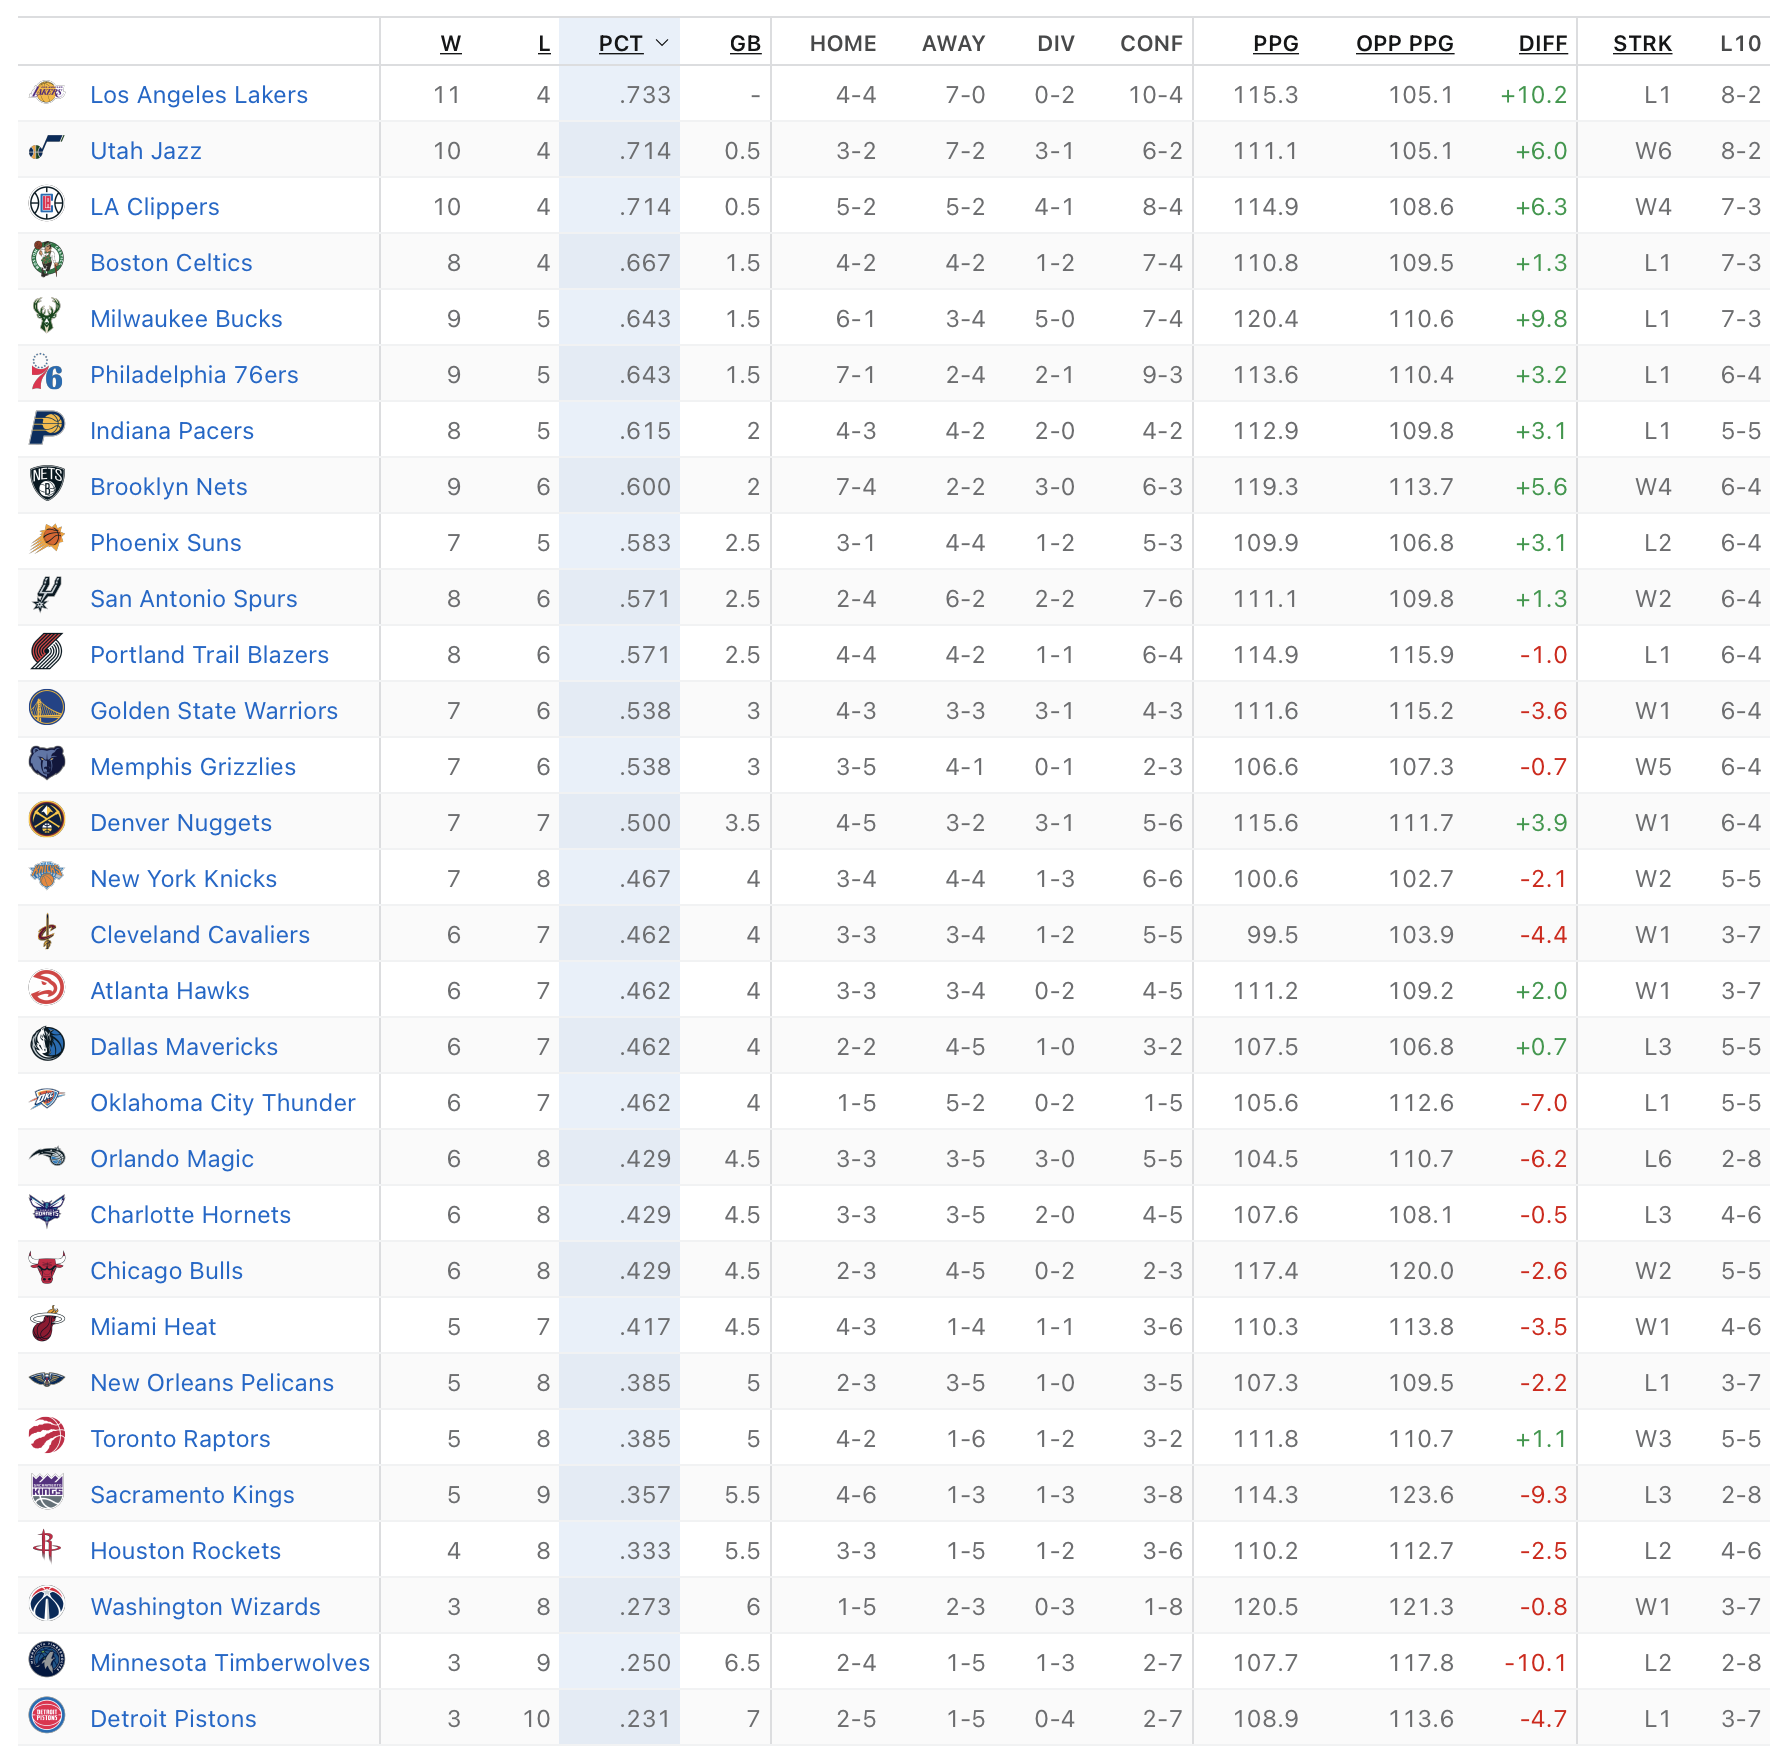 ../../_images/html-espn-standing.png